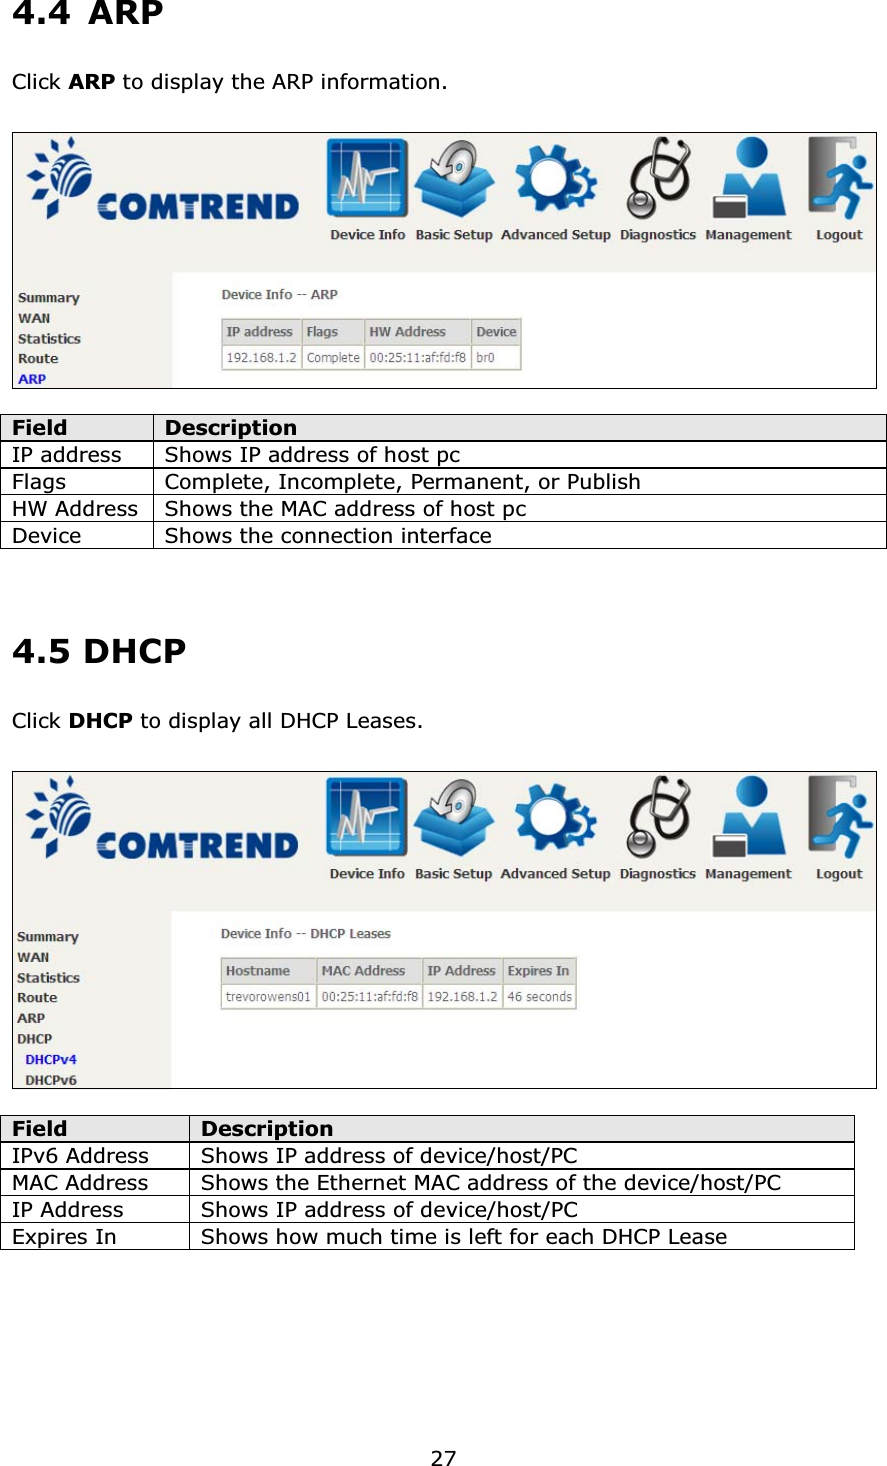 274.4 ARPClick ARP to display the ARP information.Field DescriptionIP address Shows IP address of host pcFlags Complete, Incomplete, Permanent, or PublishHW Address Shows the MAC address of host pcDevice Shows the connection interface   4.5 DHCPClick DHCP to display all DHCP Leases.Field DescriptionIPv6 Address Shows IP address of device/host/PCMAC Address Shows the Ethernet MAC address of the device/host/PCIP Address Shows IP address of device/host/PCExpires In Shows how much time is left for each DHCP Lease